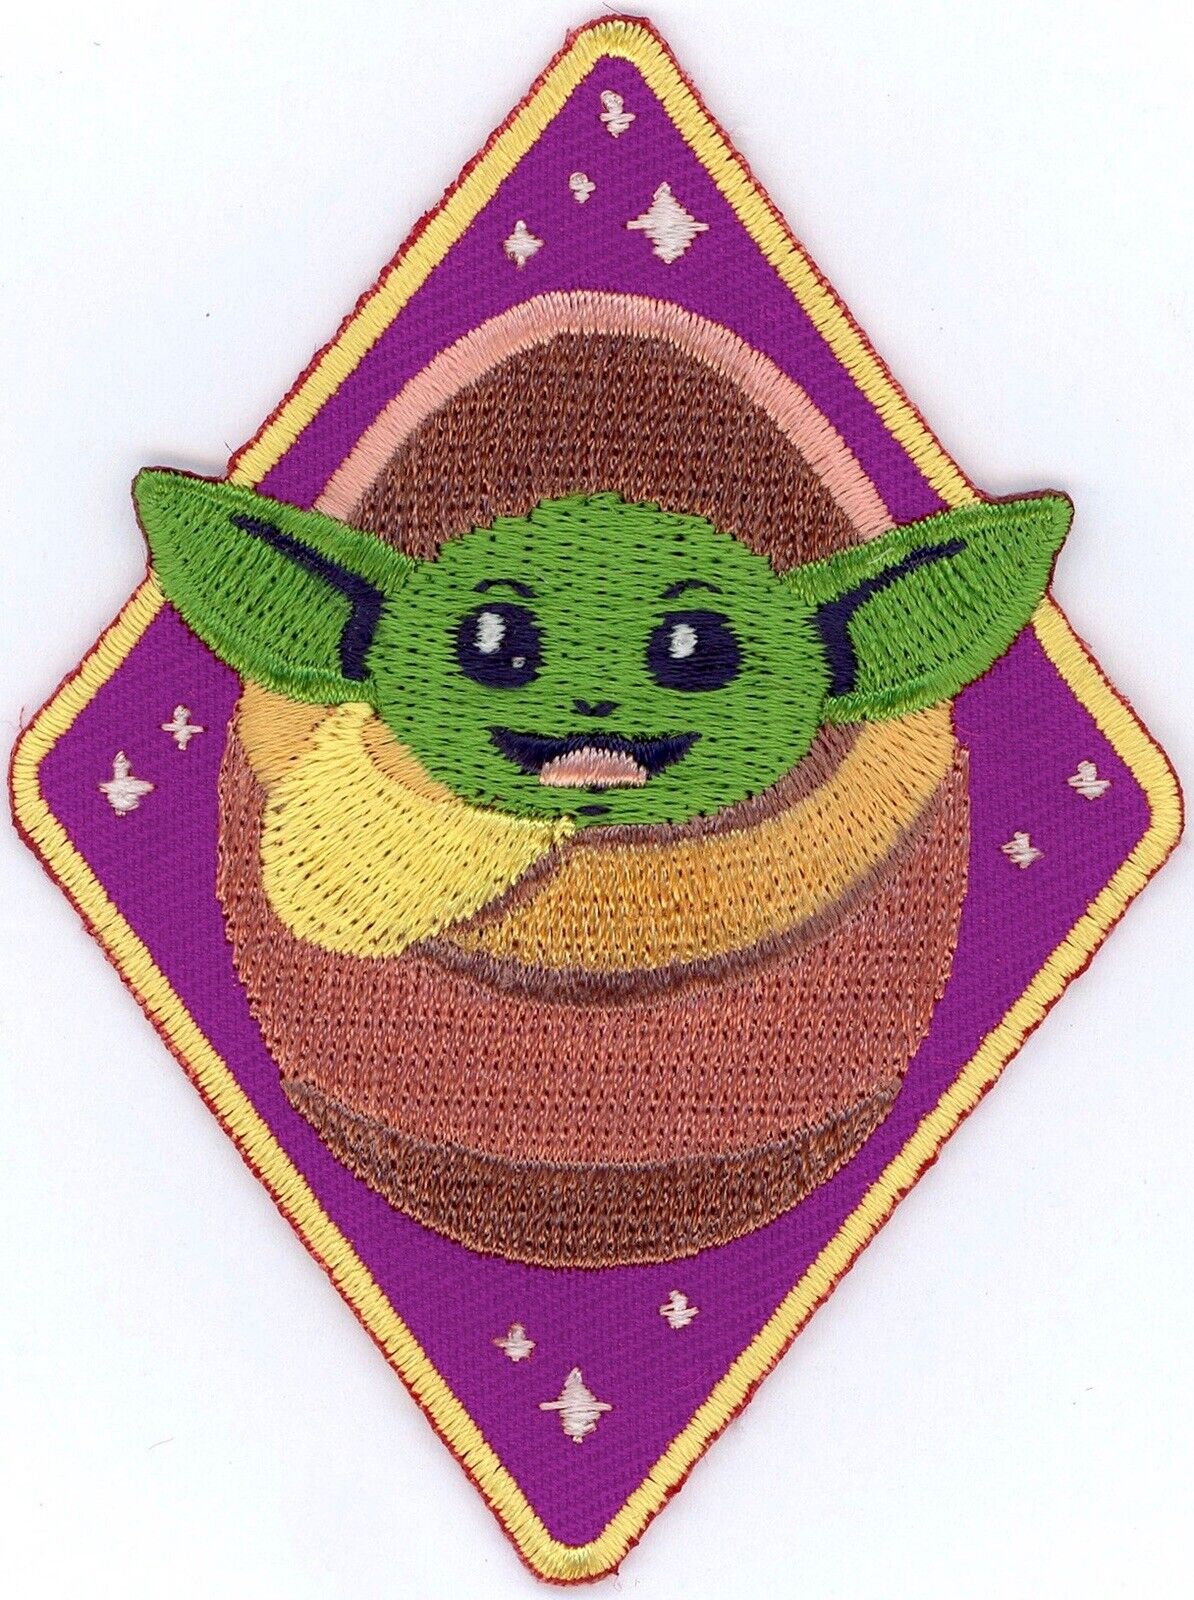 BABY YODA Patch Embroidered Iron On Star Wars patches The Child 3.5”